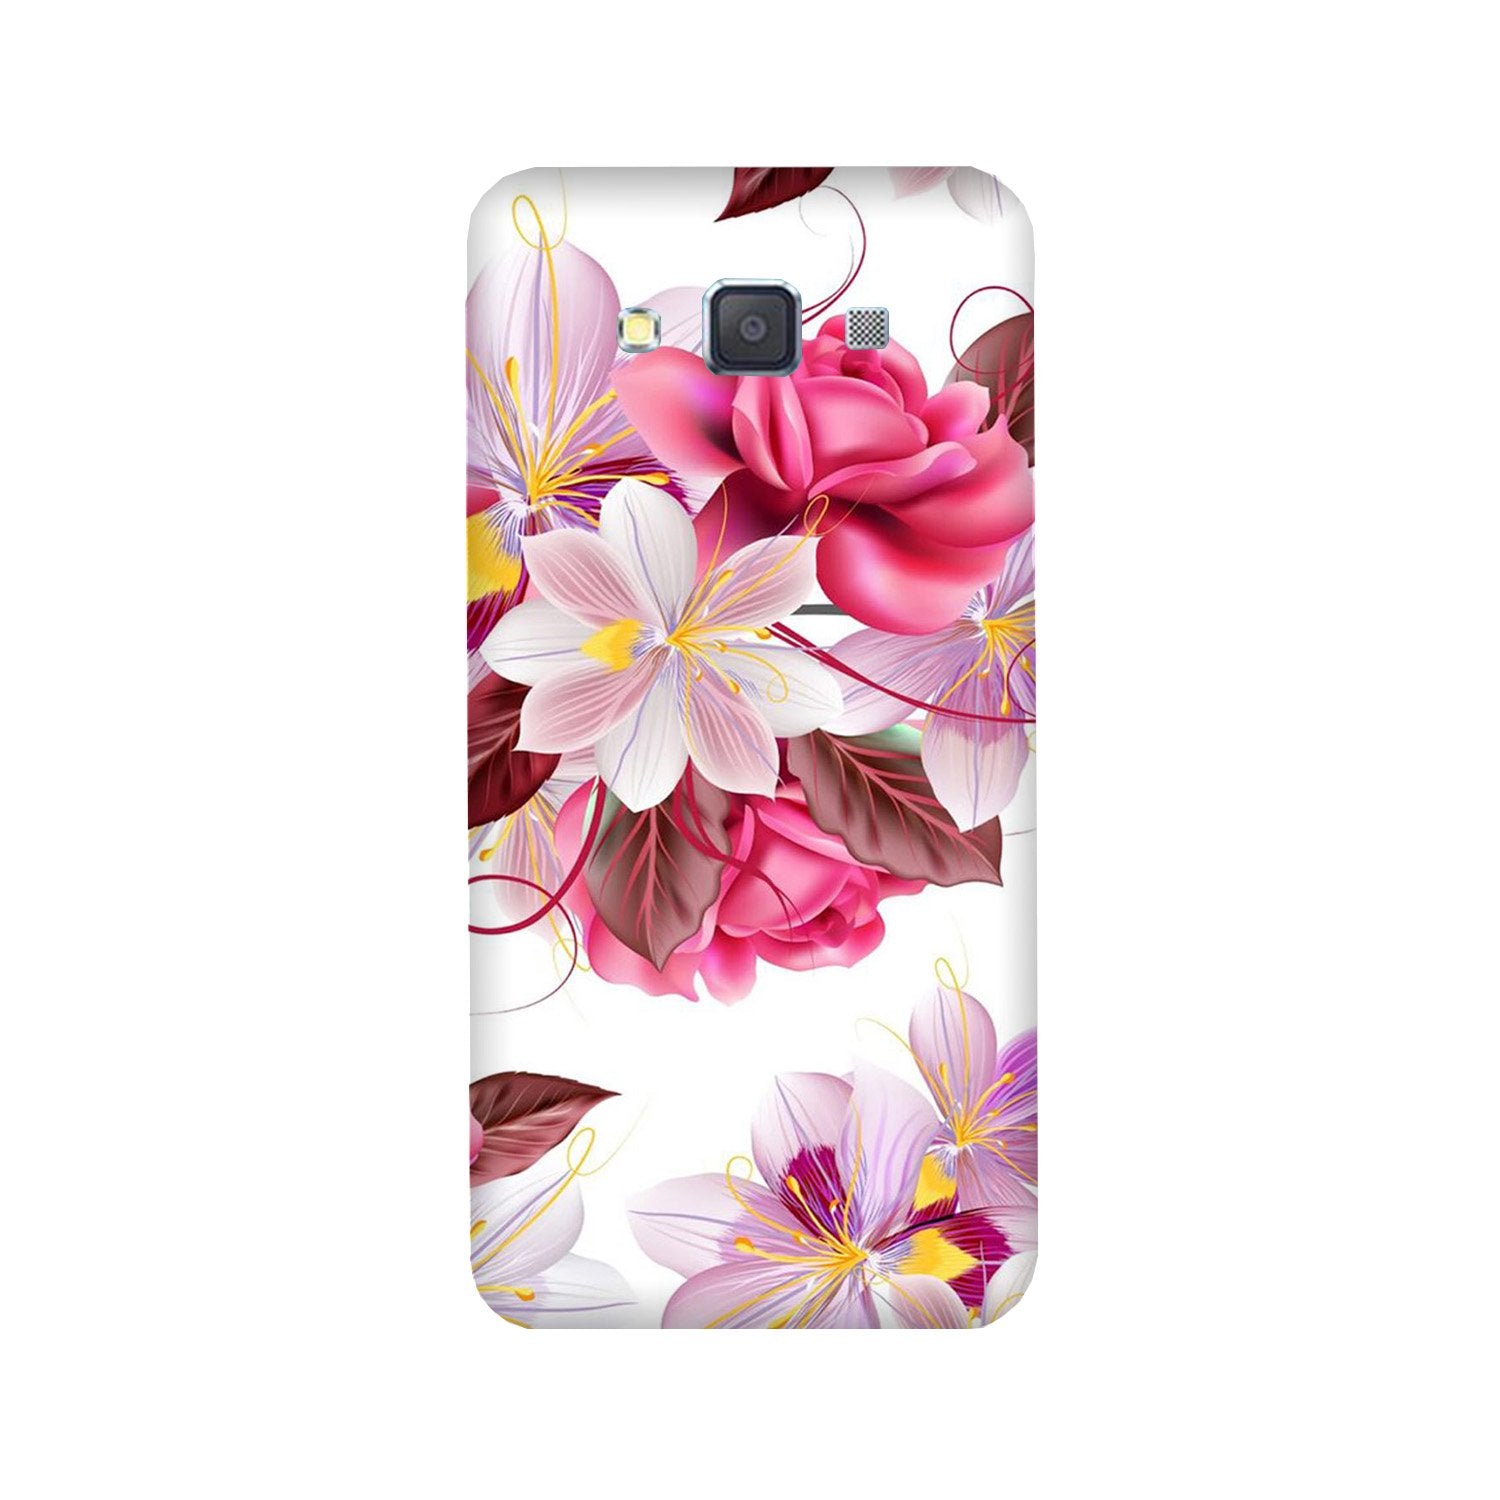 Beautiful flowers Case for Galaxy Grand Max